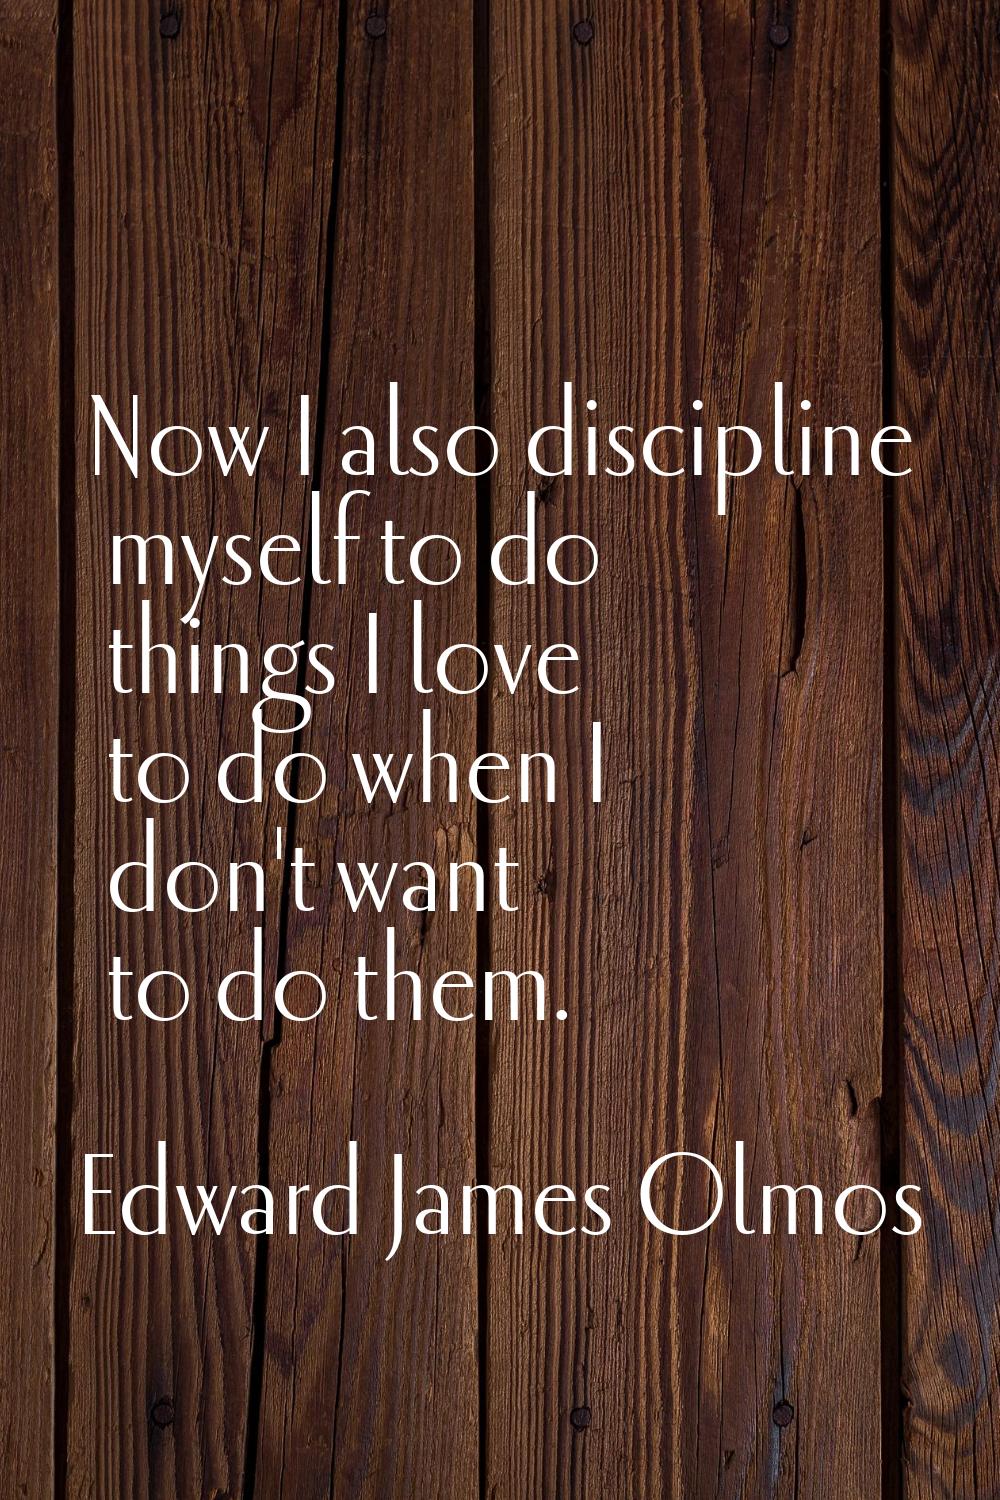 Now I also discipline myself to do things I love to do when I don't want to do them.